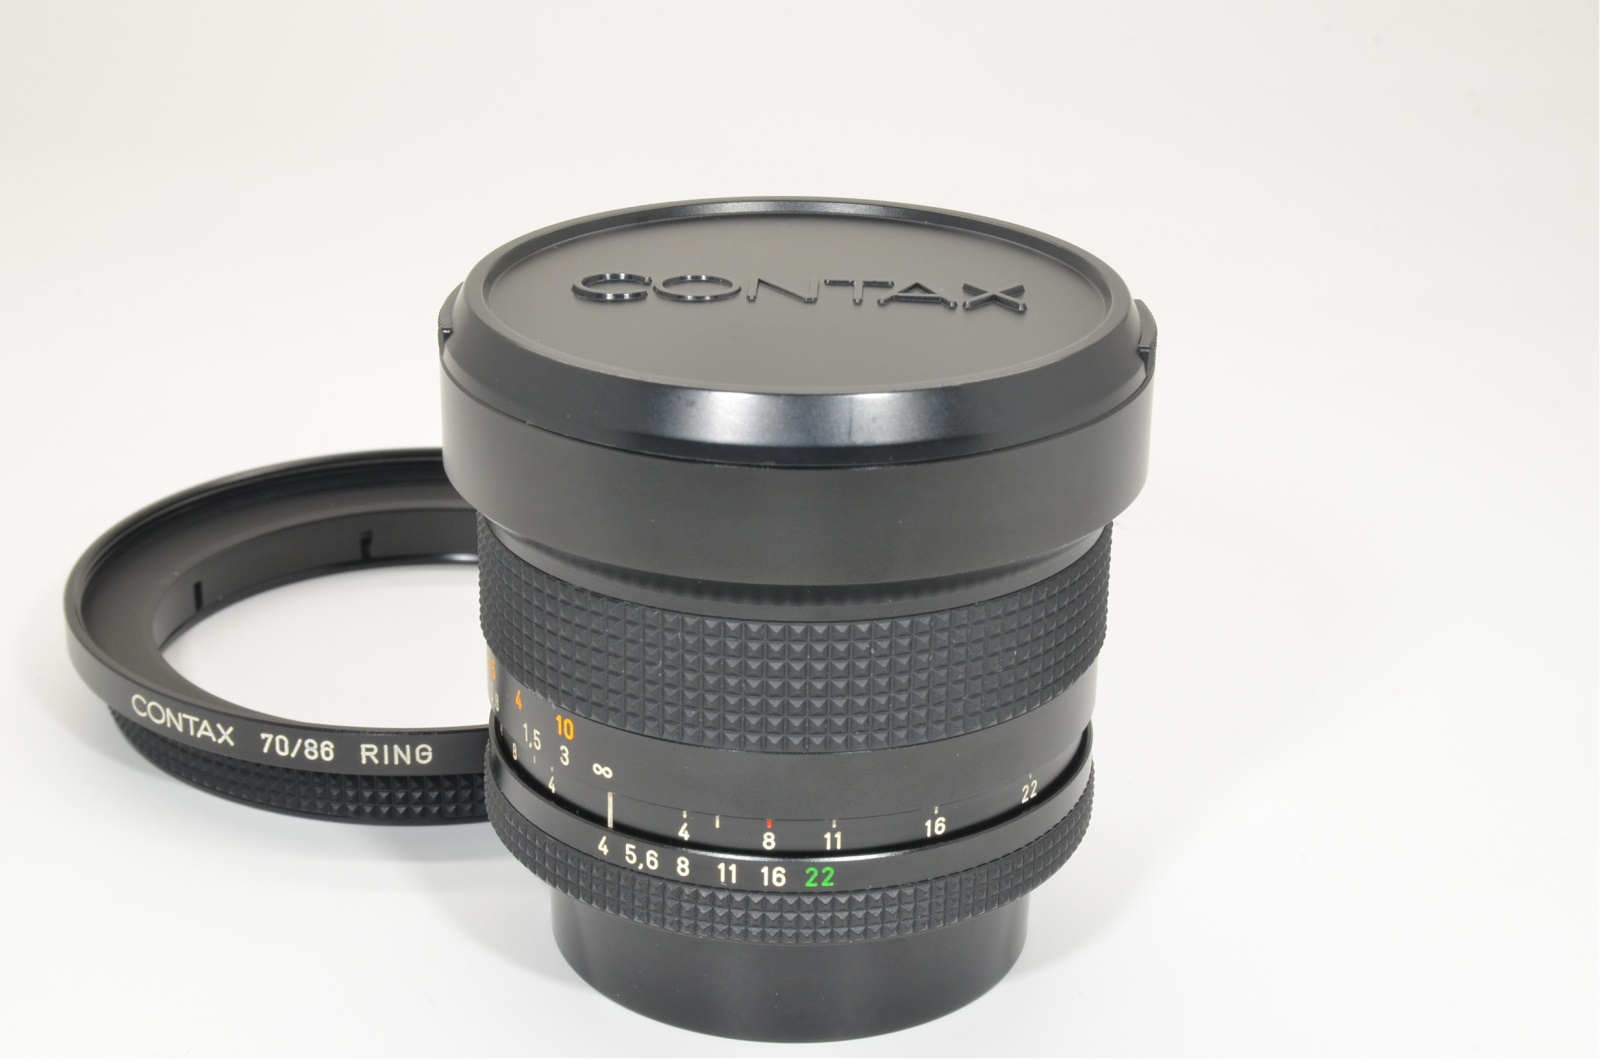 CONTAX Carl Zeiss Distagon T* 18mm f4 MMJ Japan with 70/86 RING 